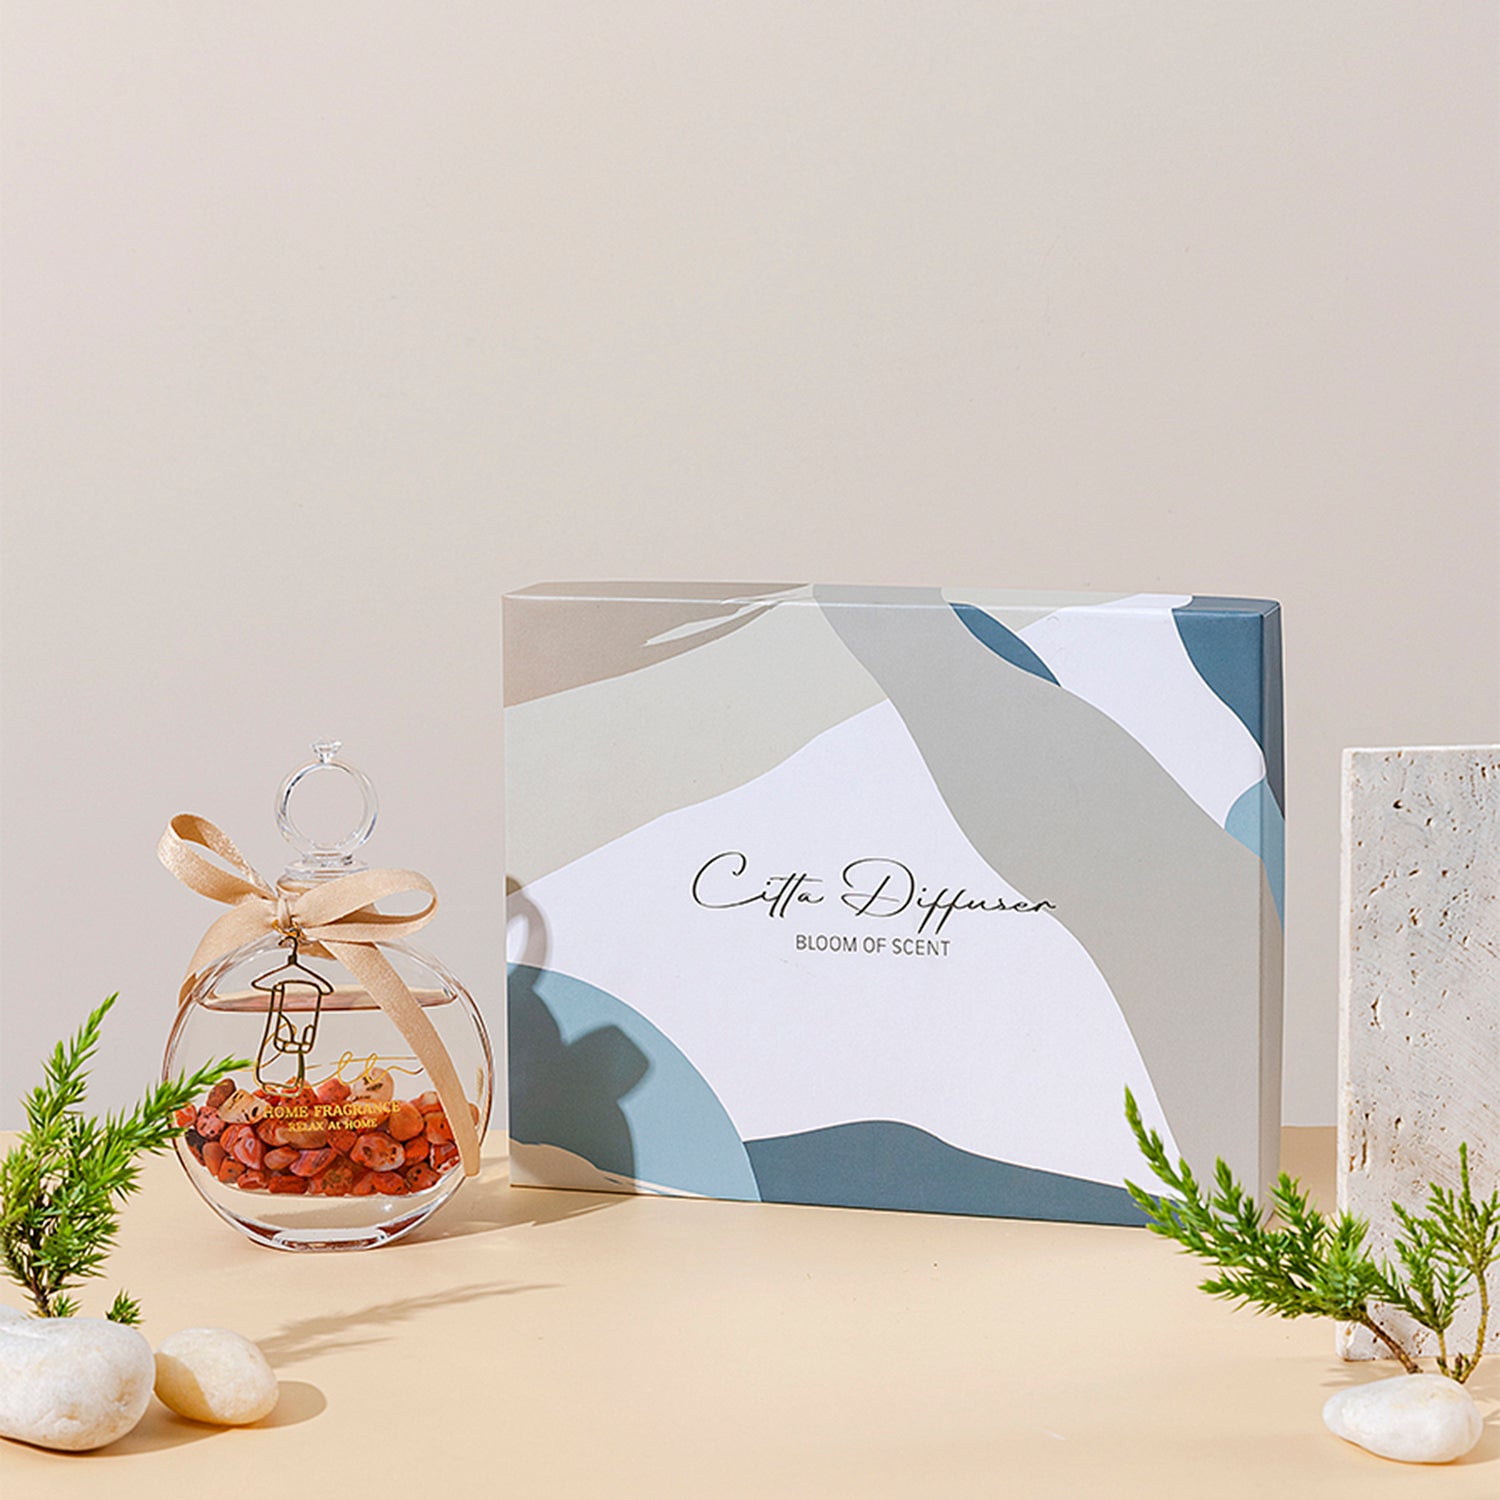 CITTA Stone Series Reed Diffuser Aromatherapy 100ML Premium Essential Oil with Reed Stick and Crystal Stone Reed Diffuser CITTA 